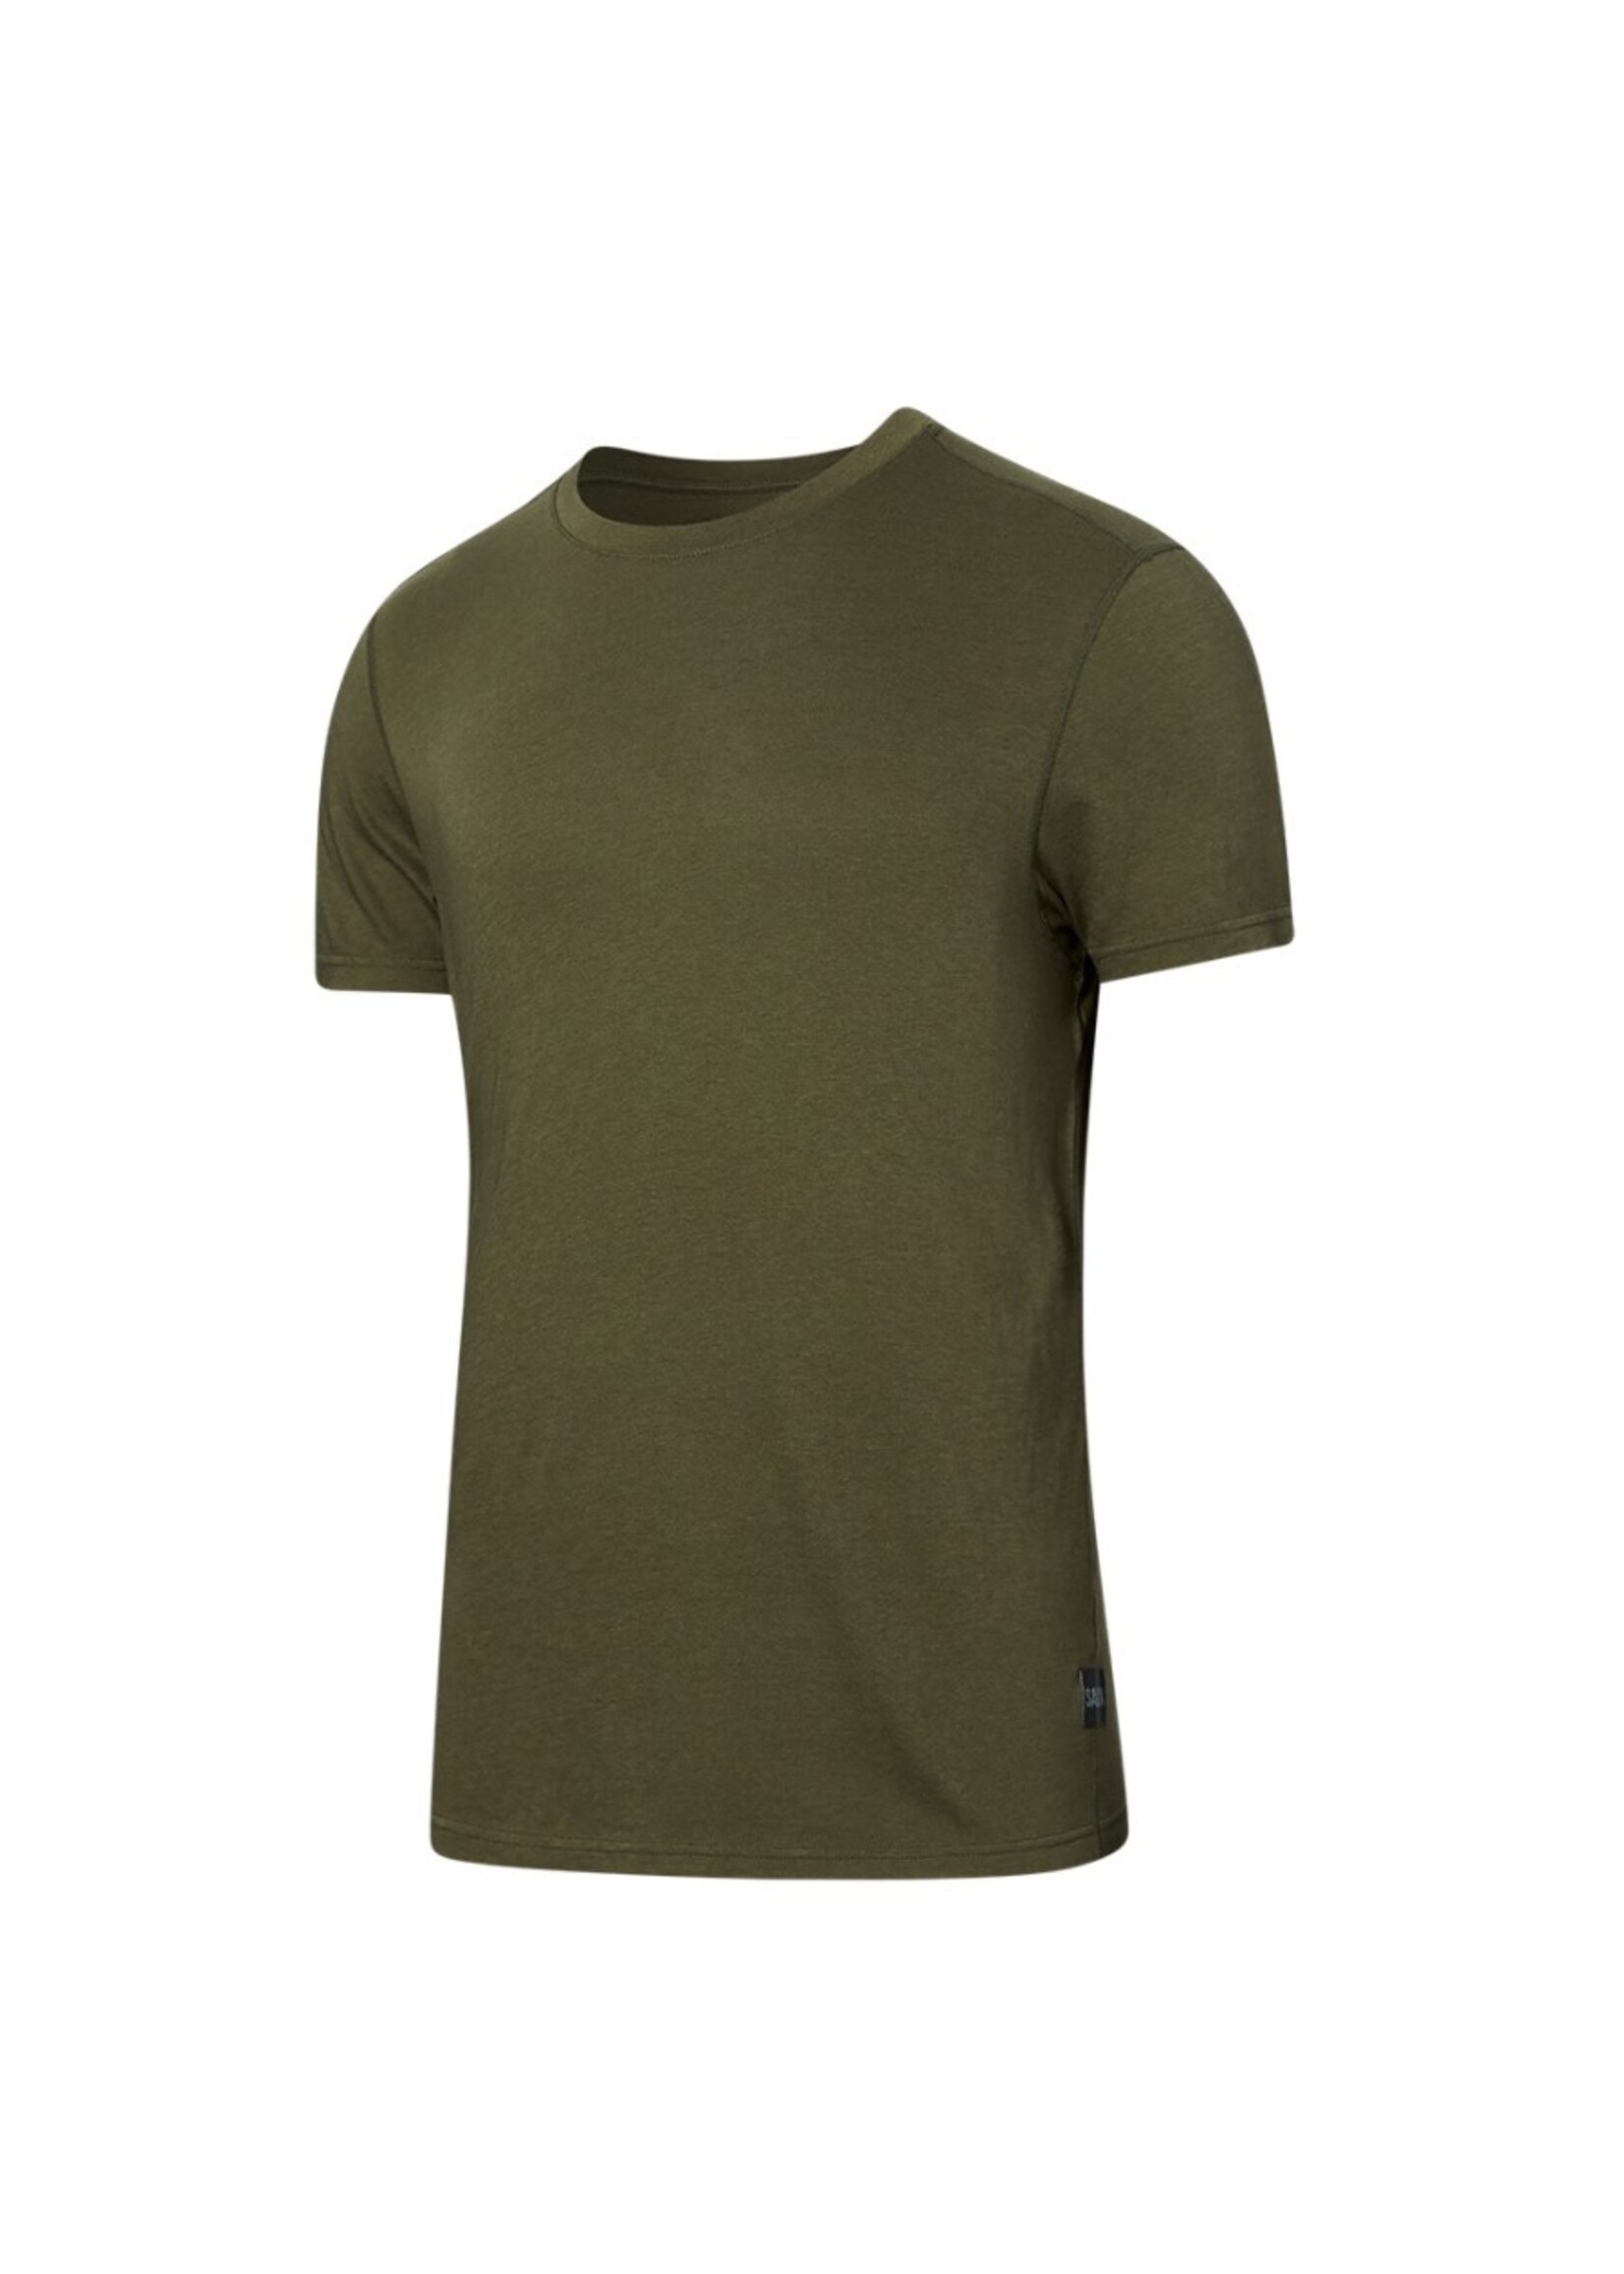 Saxx Fashion T Shirt - Get Best Price from Manufacturers